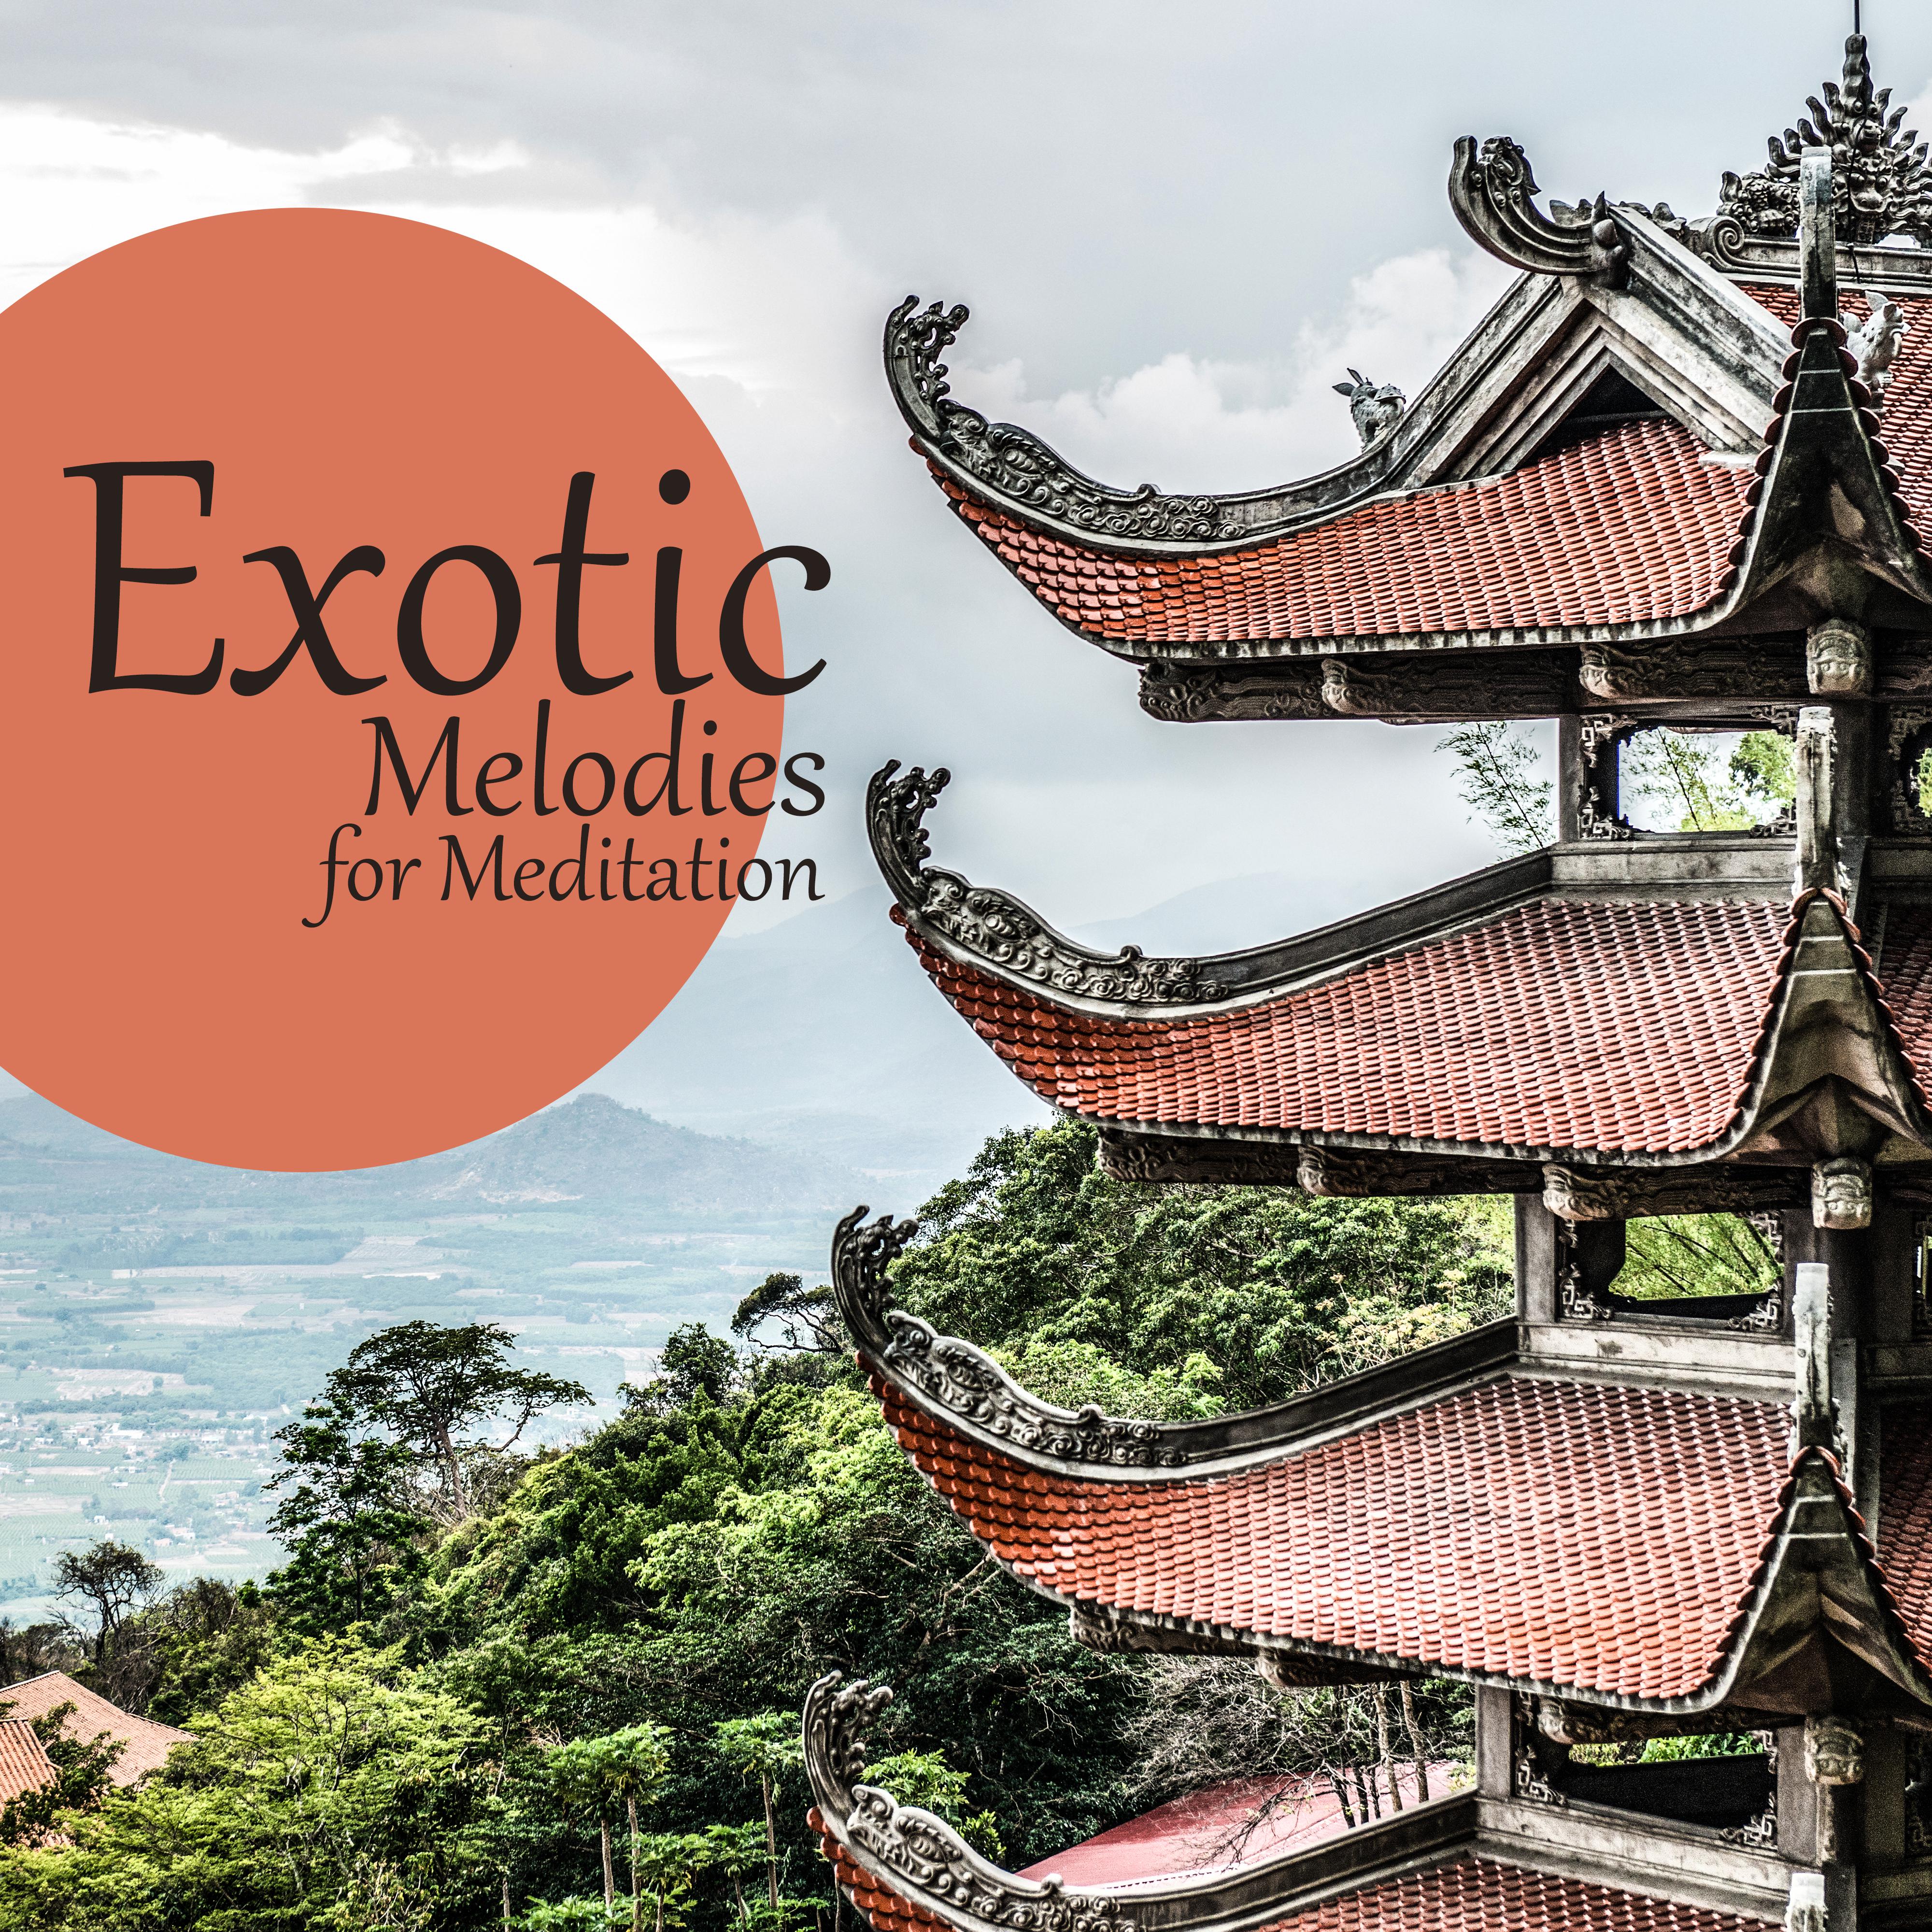 Exotic Melodies for Meditation